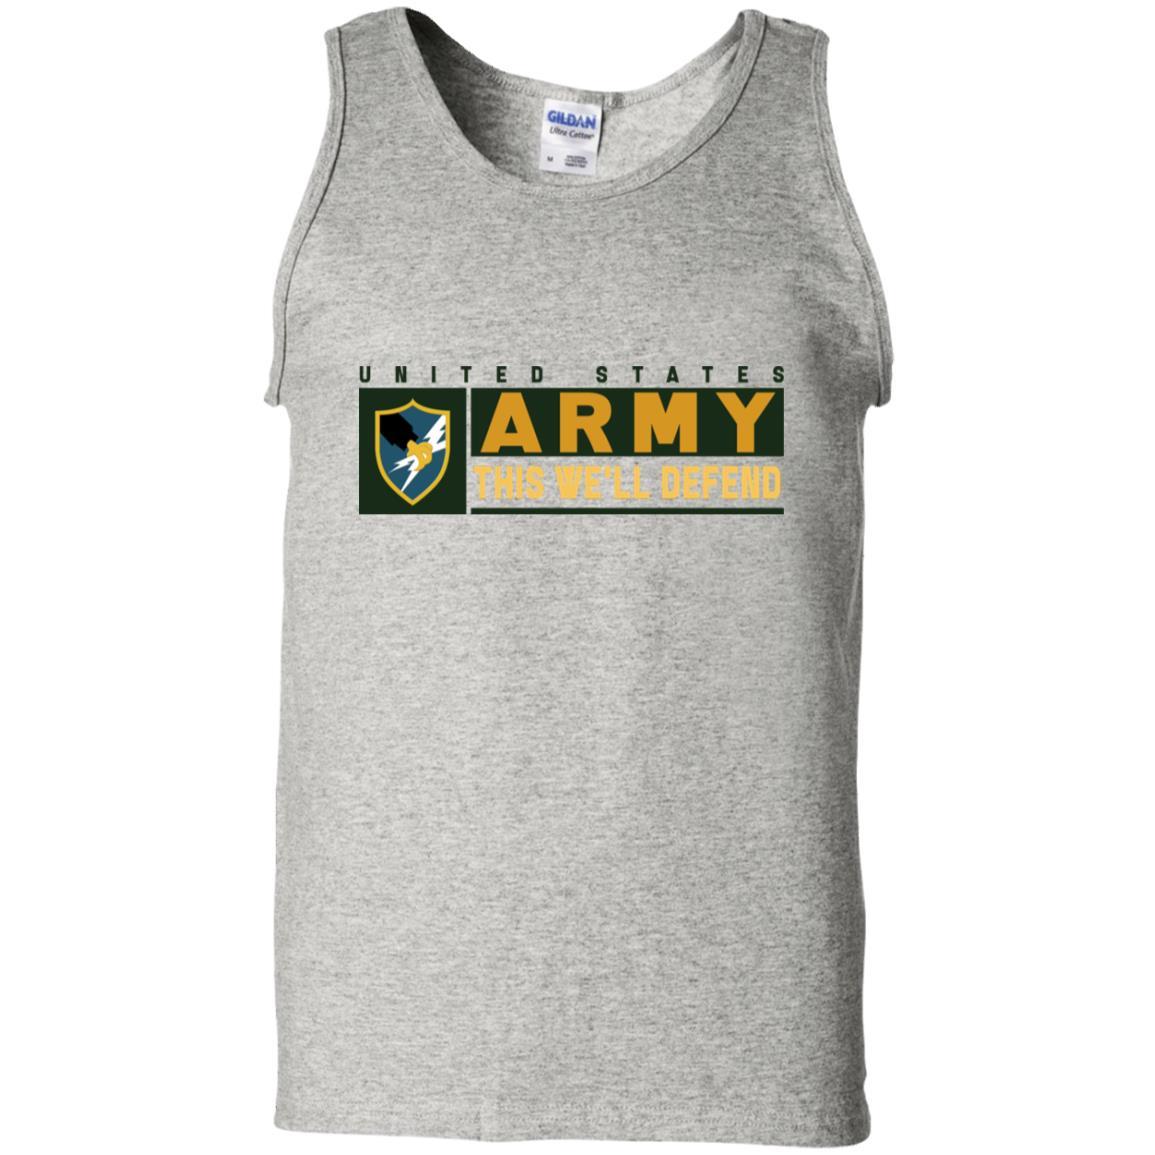 US Army Security Agency- This We'll Defend T-Shirt On Front For Men-TShirt-Army-Veterans Nation